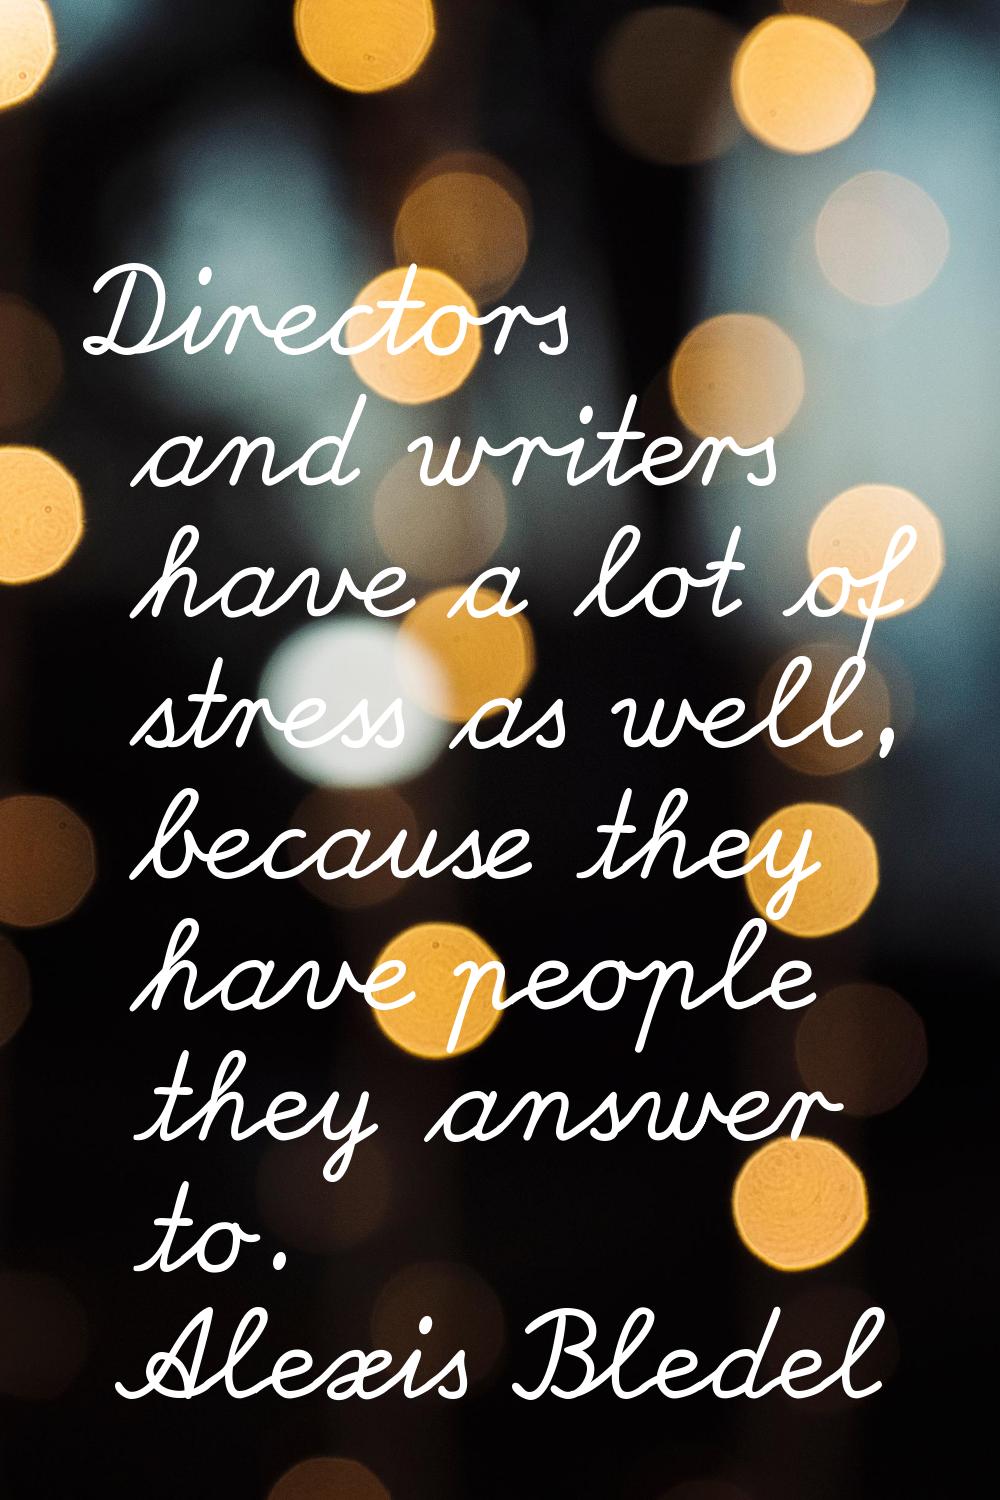 Directors and writers have a lot of stress as well, because they have people they answer to.